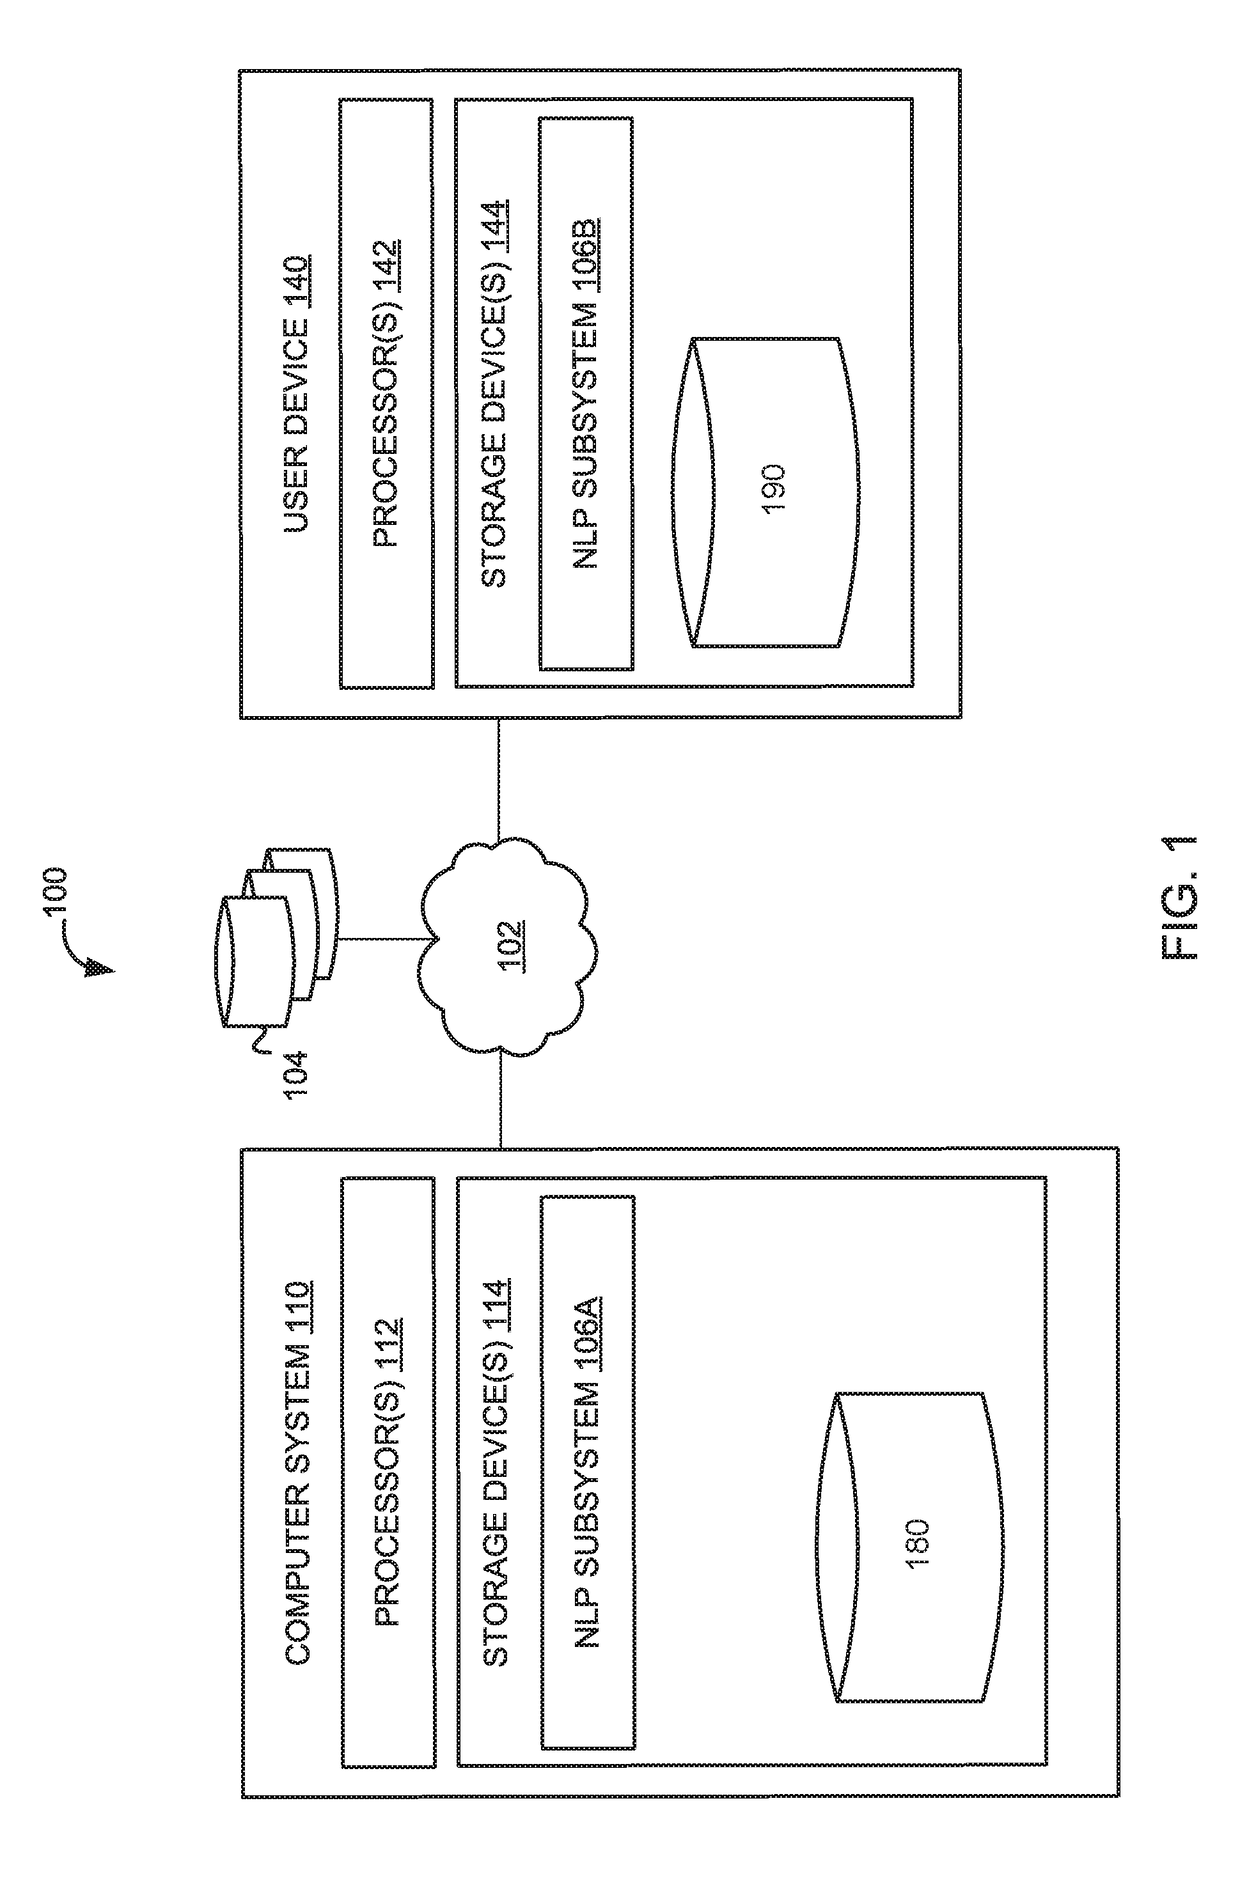 System and method of disambiguating natural language processing requests